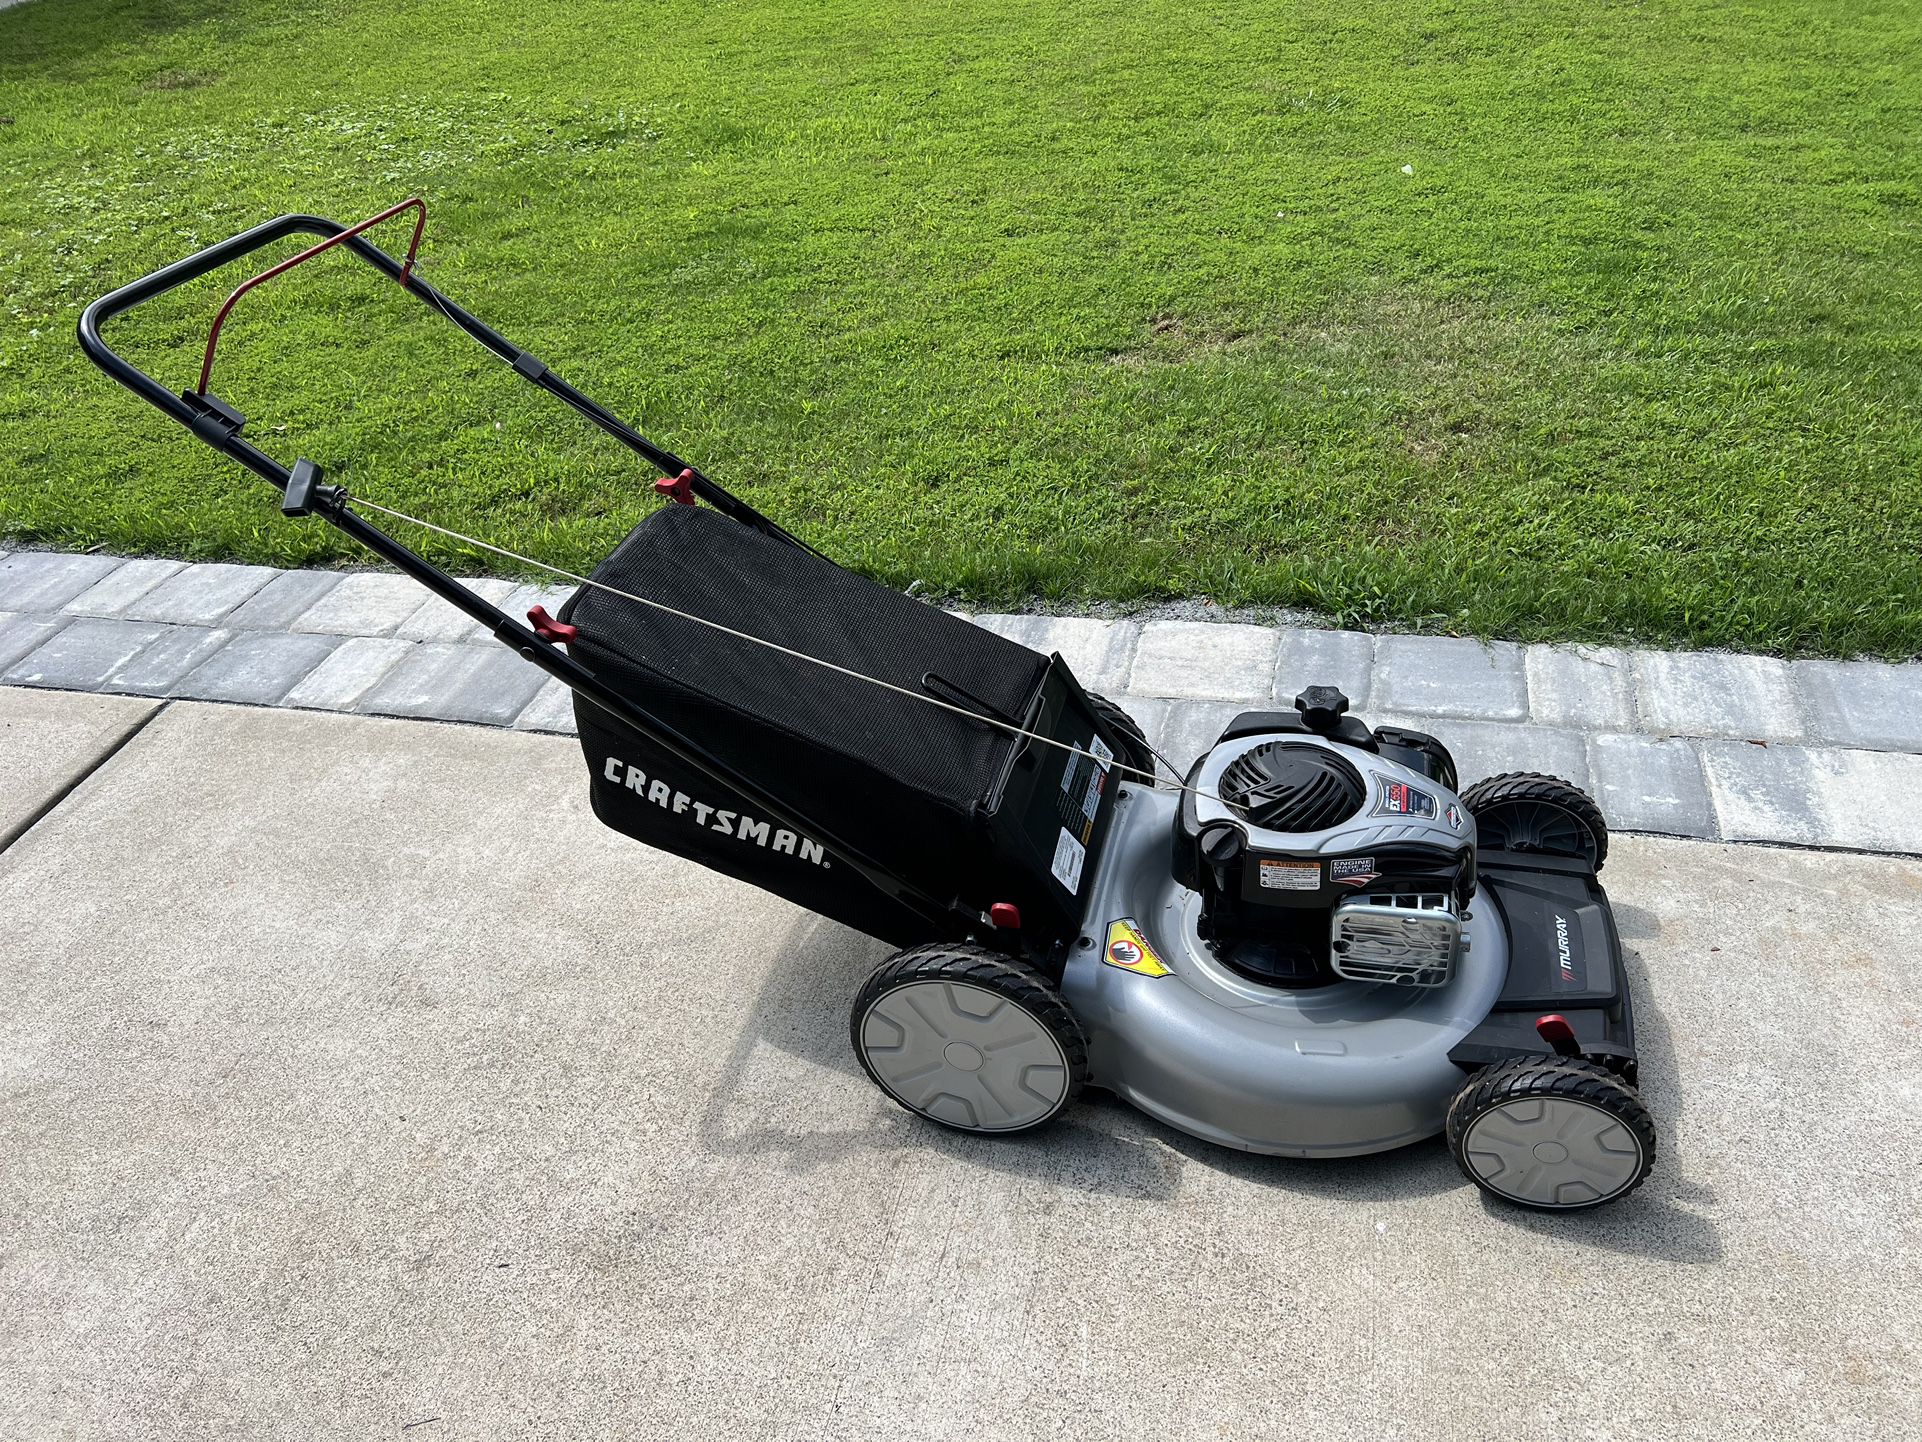 NEW 21” GAS PUSH Mower works GREAT! $225 CAN DELIVER!